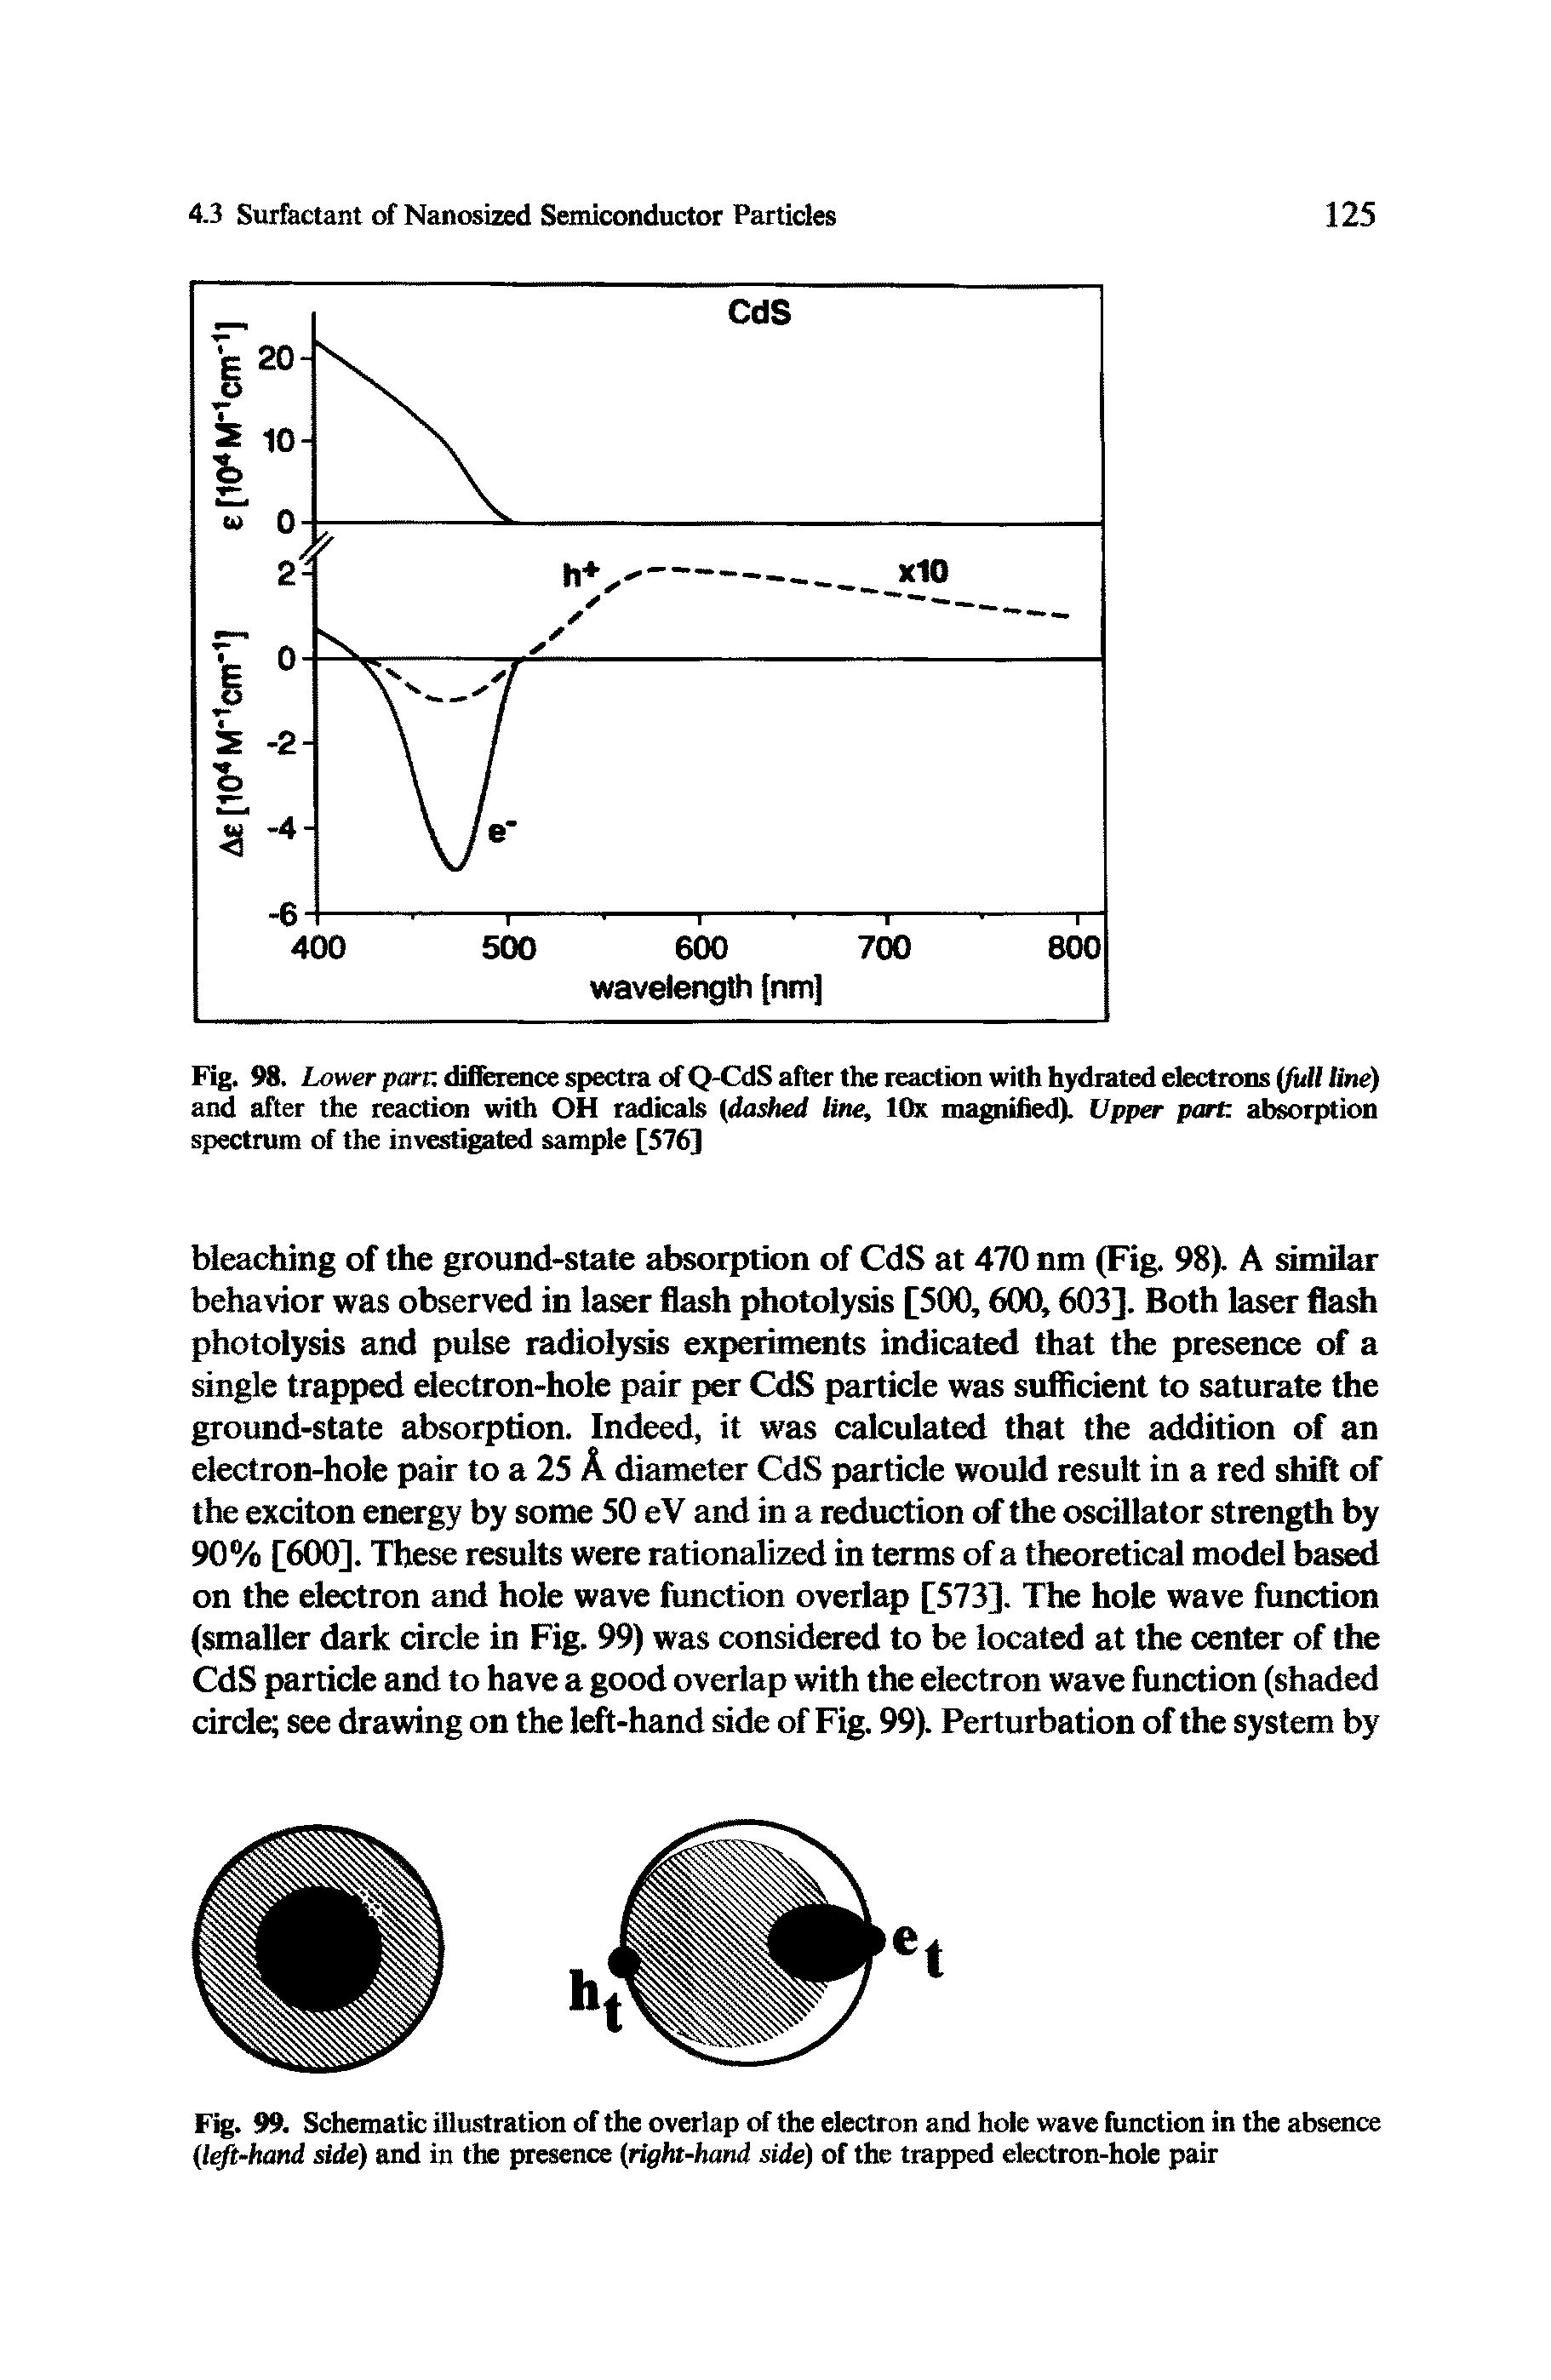 Fig. 98. Lower parr, difference spectra of Q-CdS after the reaction with hydrated electrons (full line) and after the reaction with OH radicals (dashed line, lOx magnified). Upper part absorption spectrum of the investigated sample [576]...